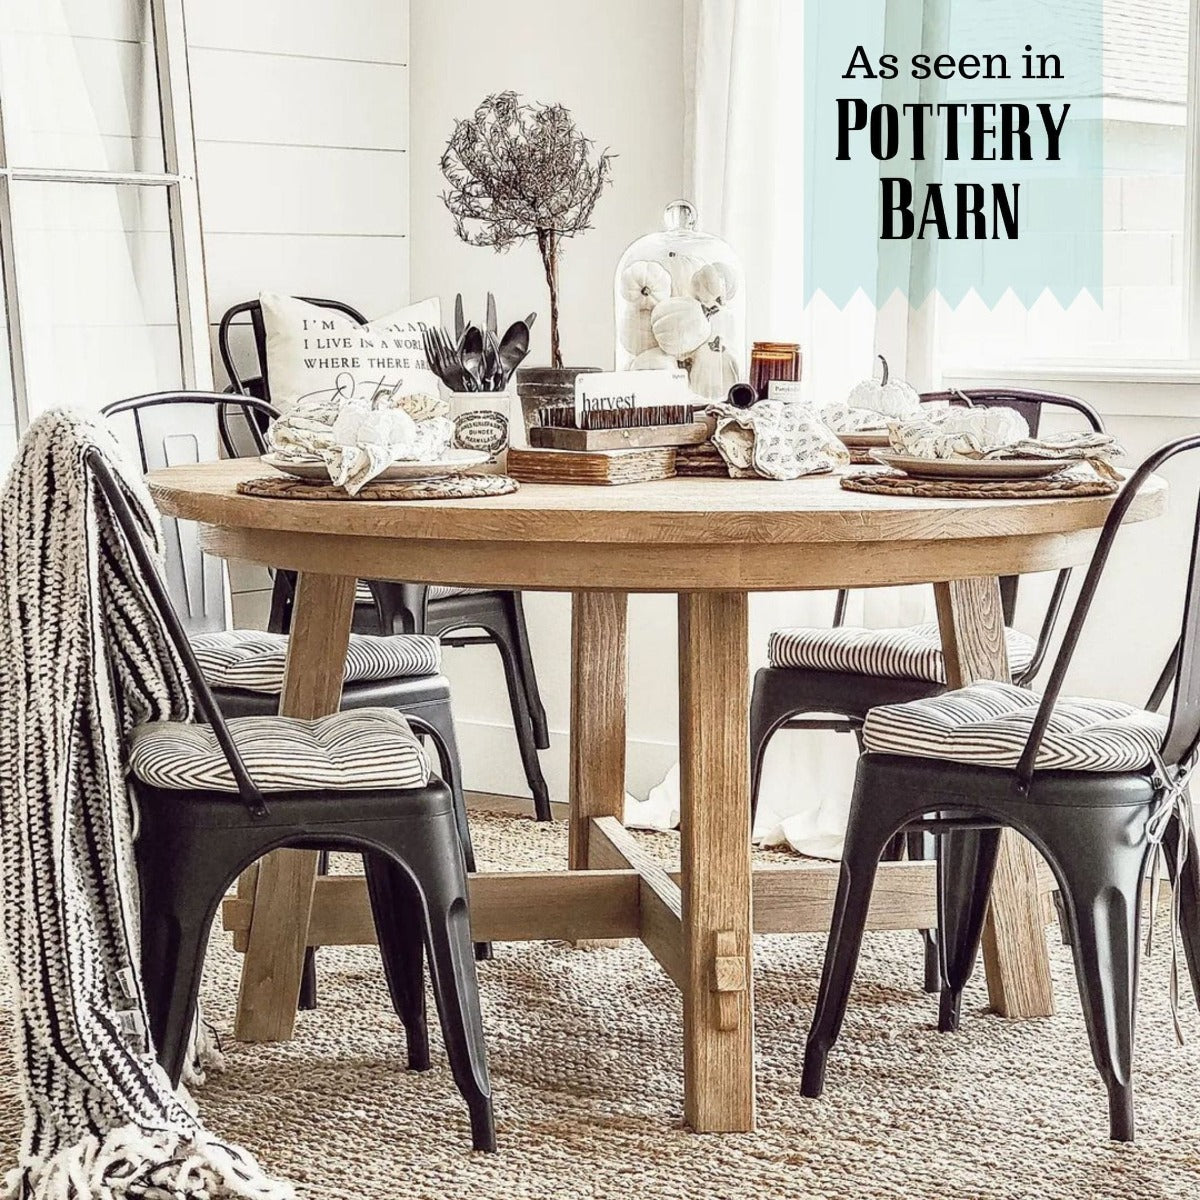 black and white striped industrial chair pads on farmhouse metal chairs as seen in pottery barn - barnett home decor